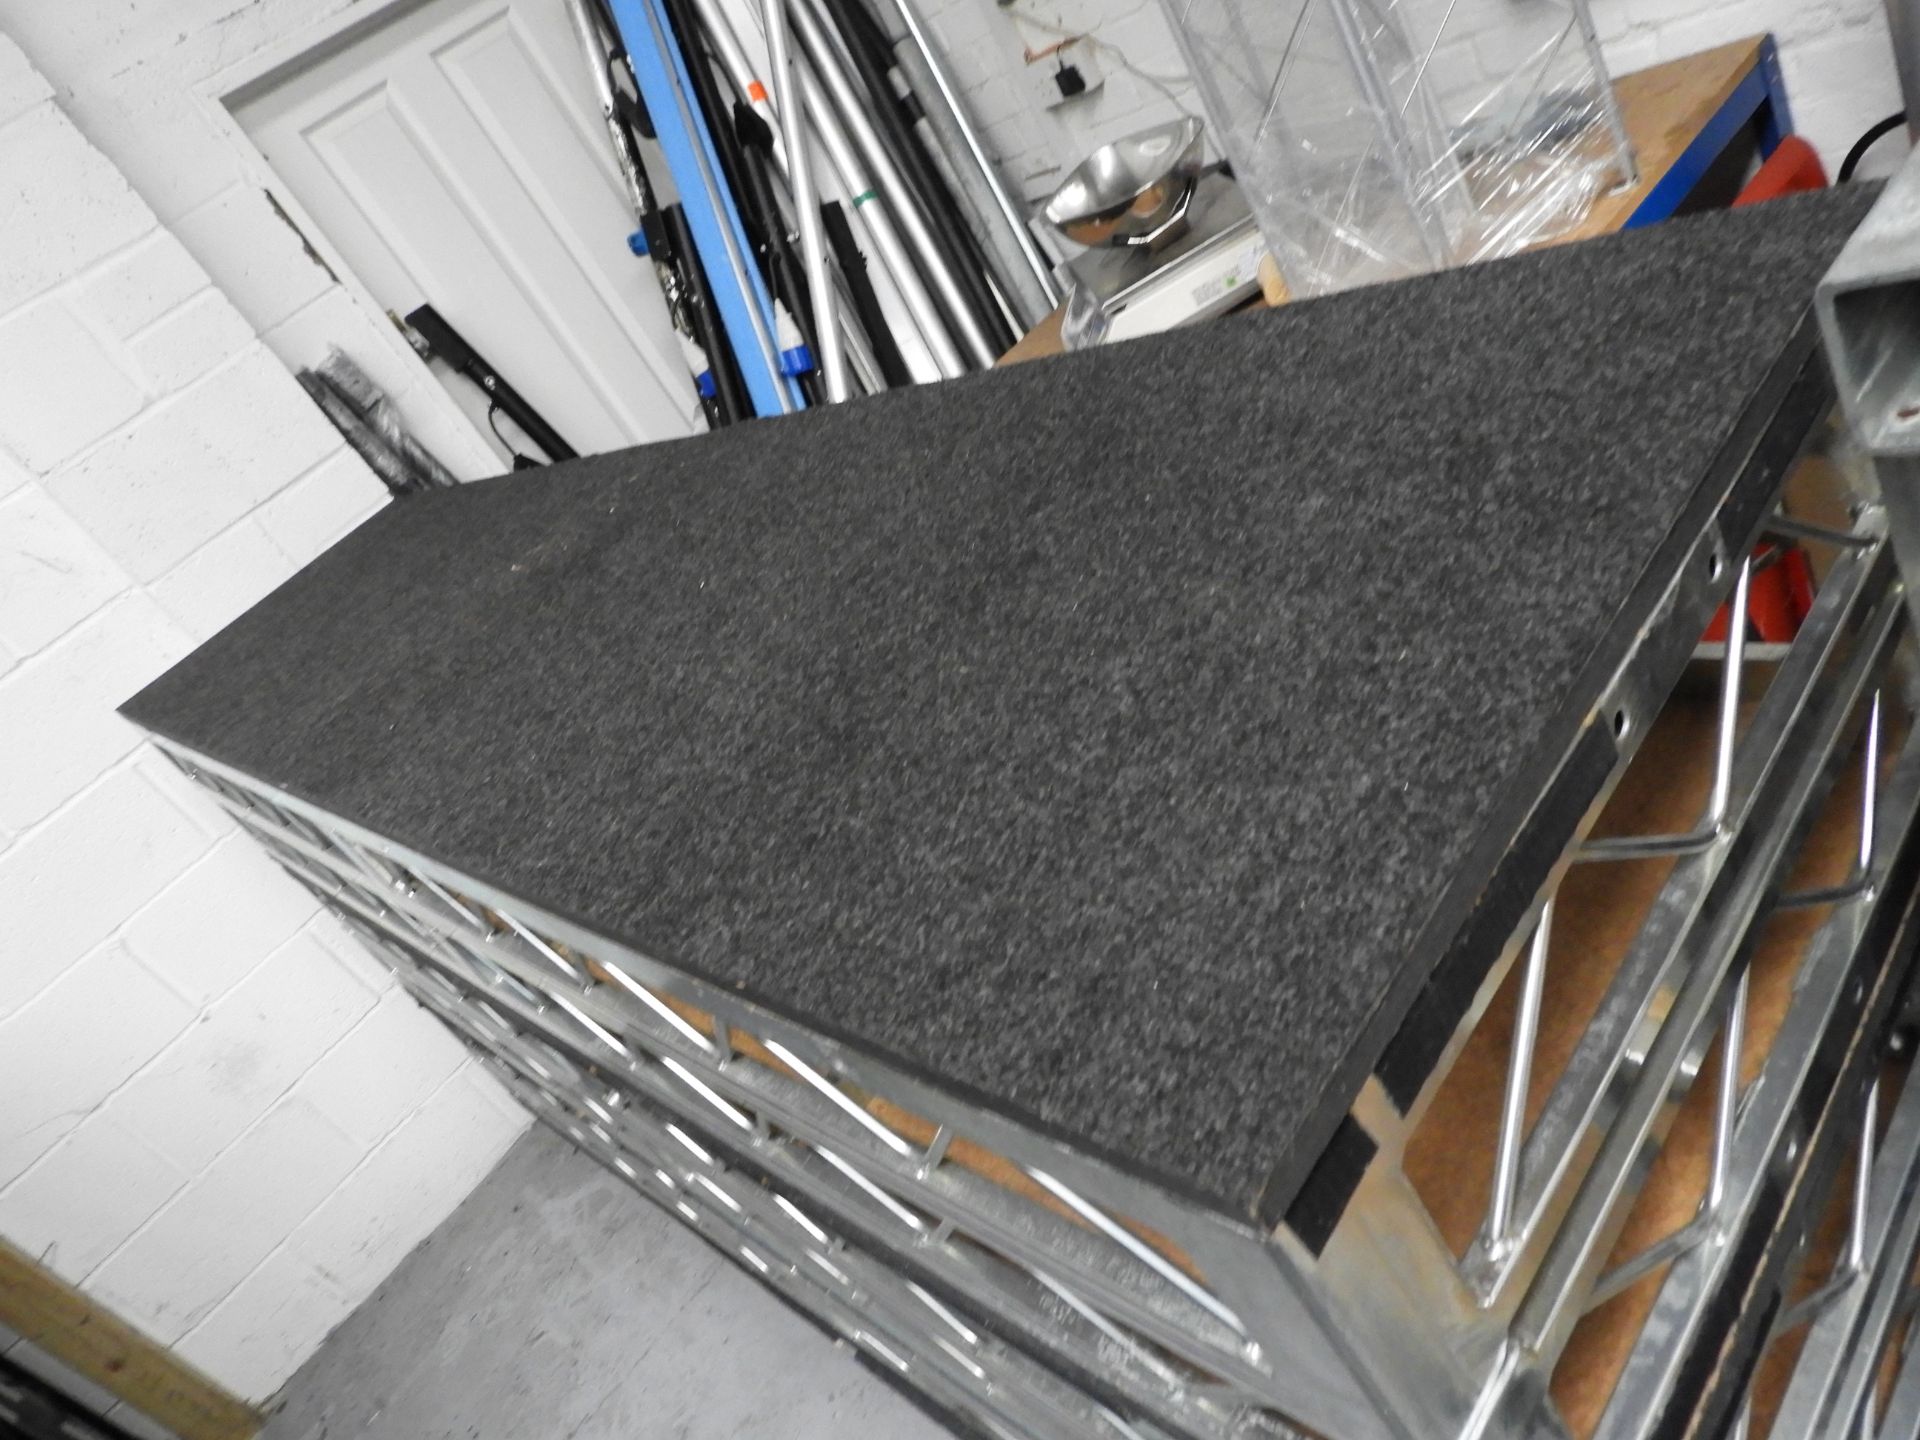 Steel deck silver carpeted and sound deadened with velcro fittings for stage blacks 8' x 2'